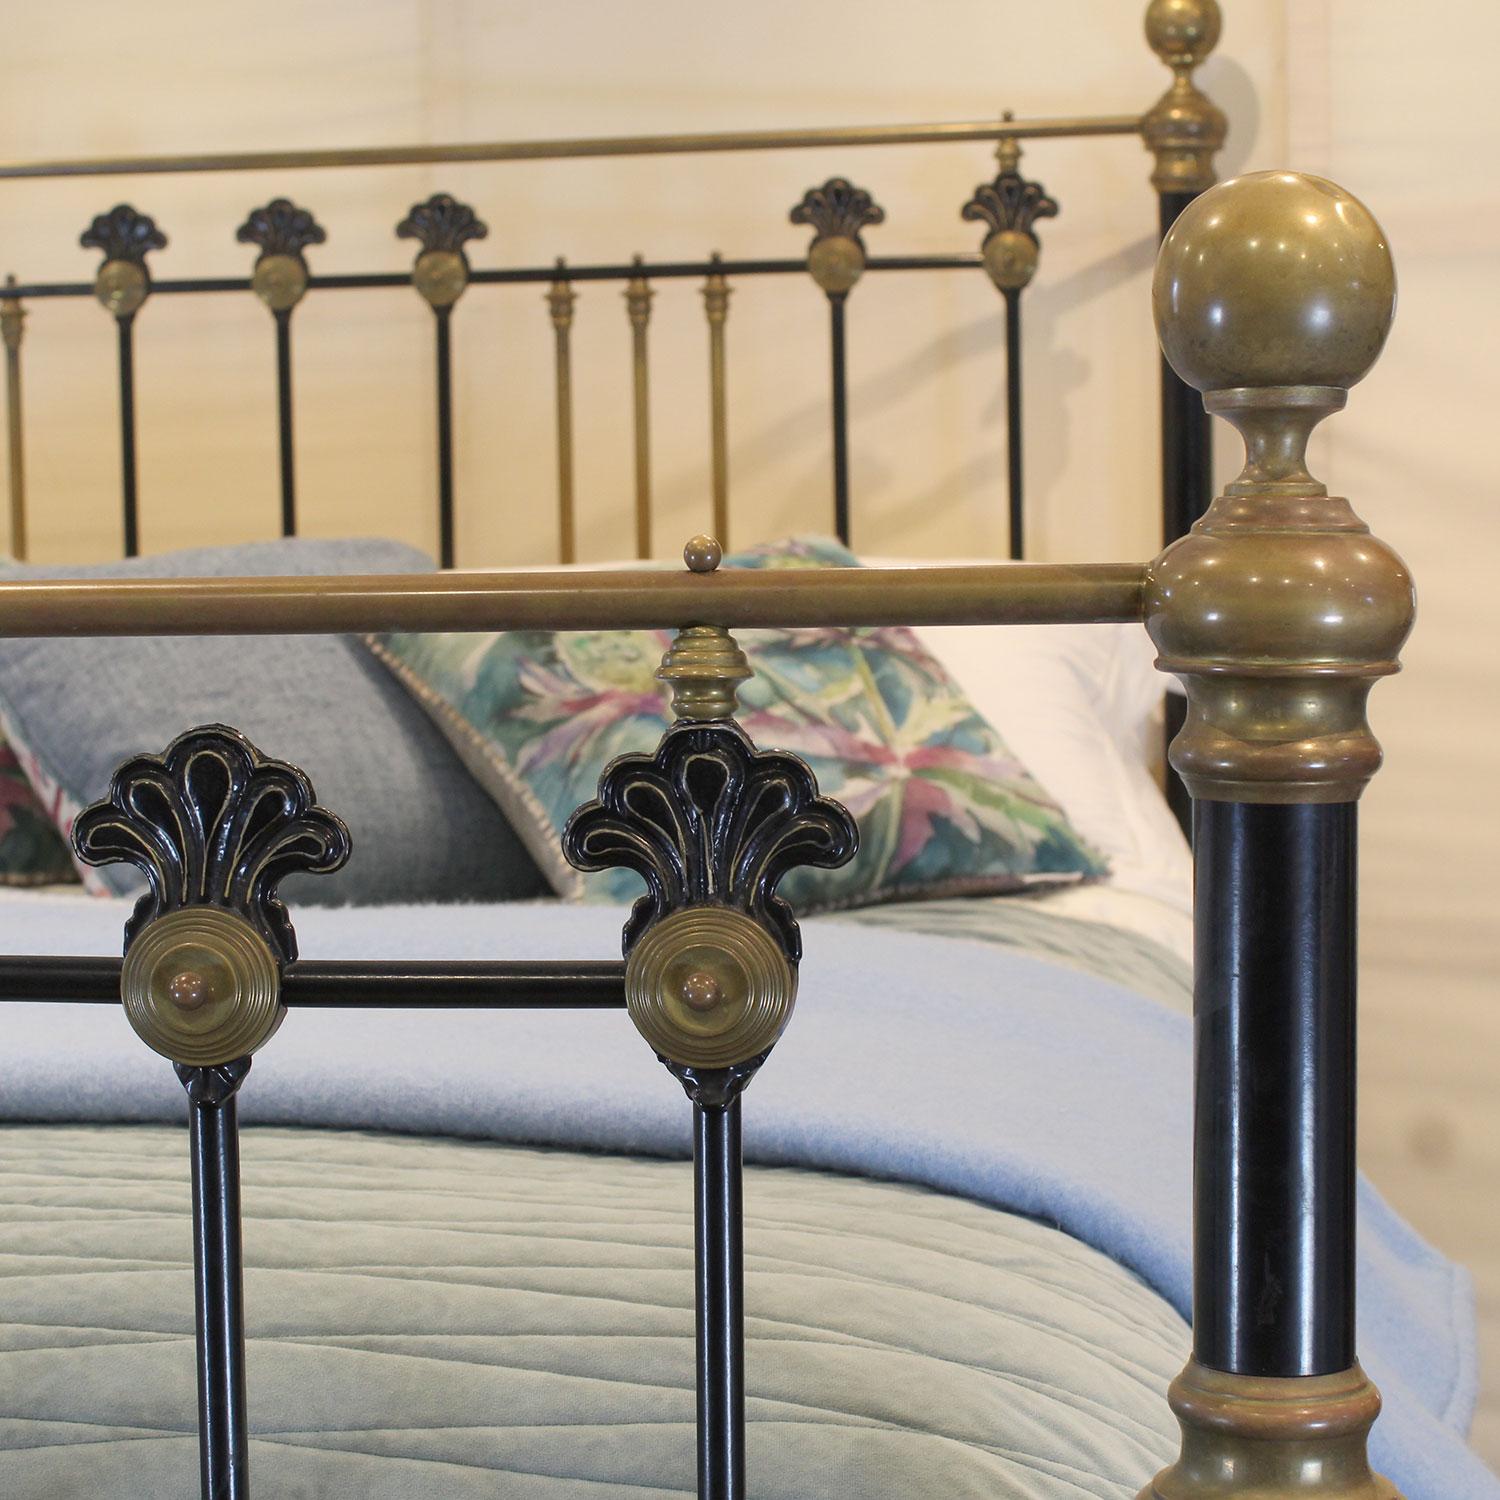 Late 19th Century Wide Decorative Brass and Iron Victorian Bed in Black, MSK75